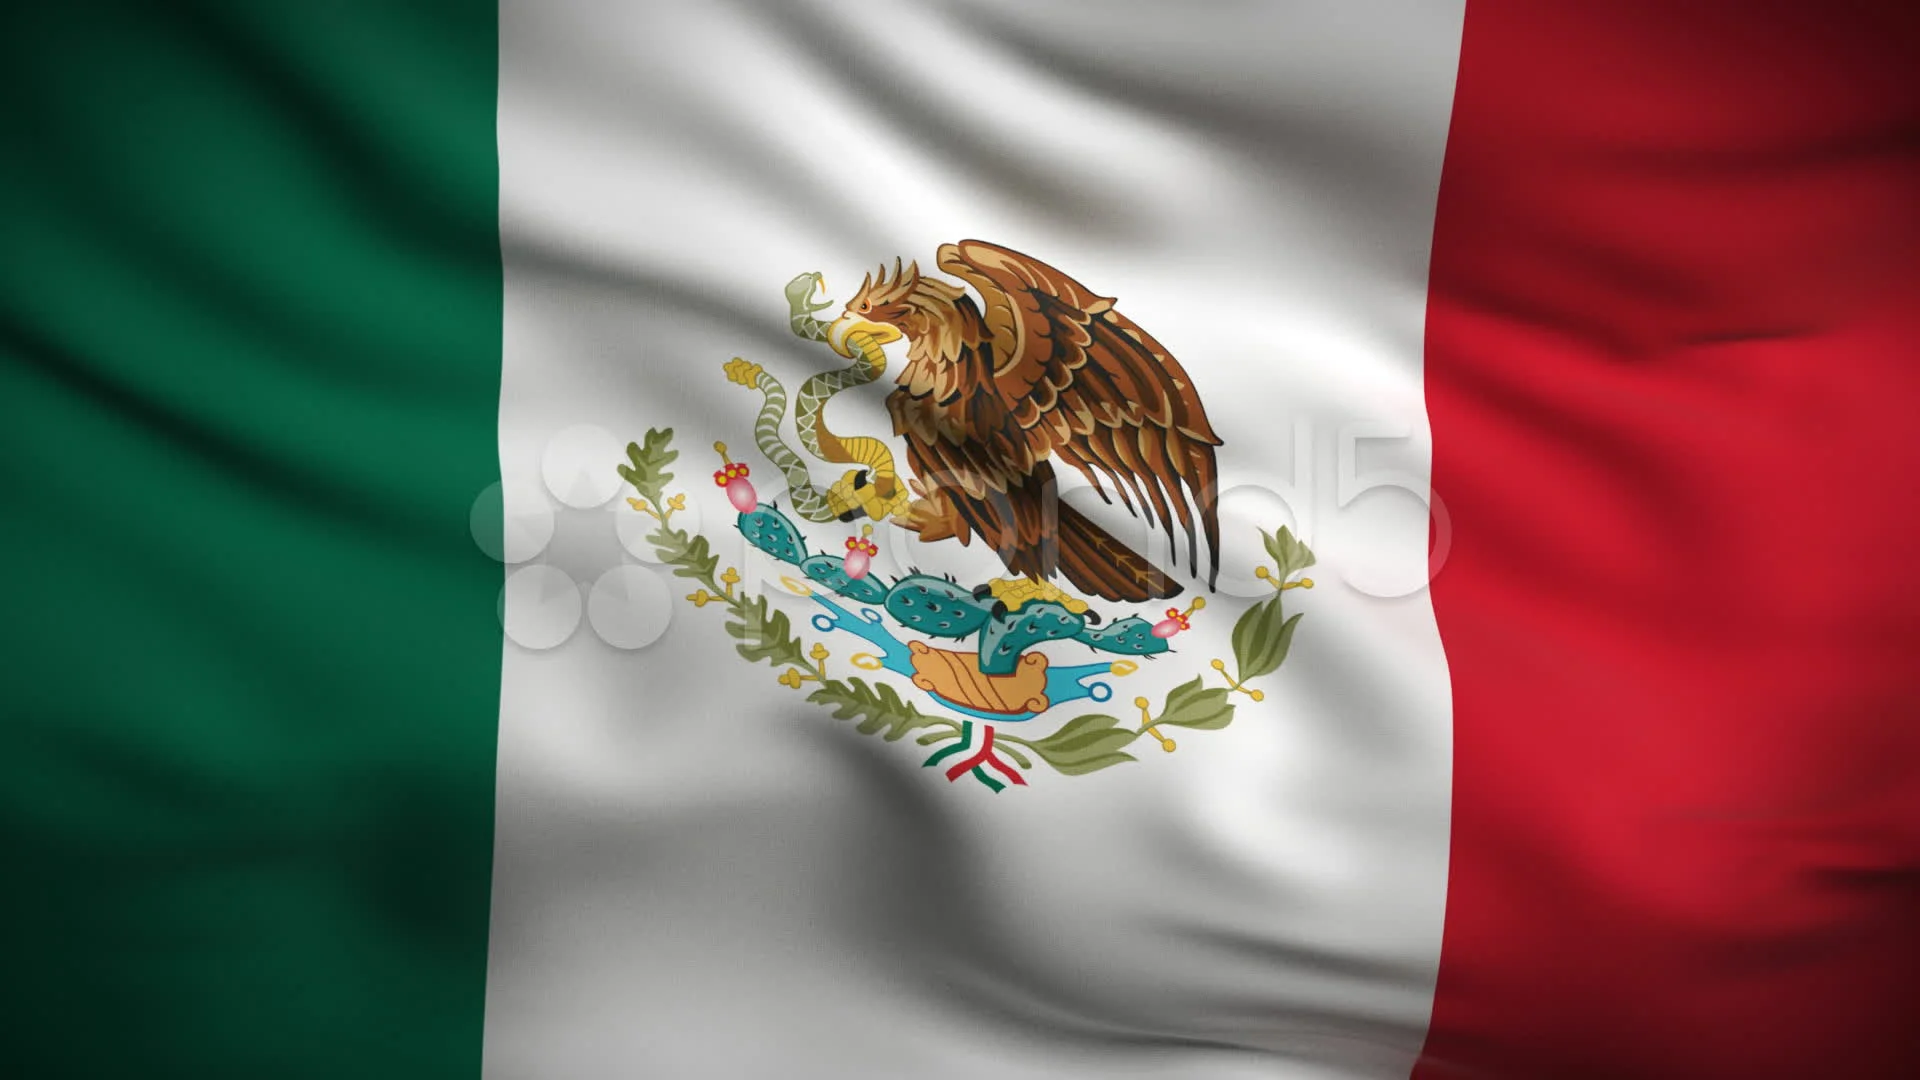 Mexican Flag HD. Looped., Stock Video